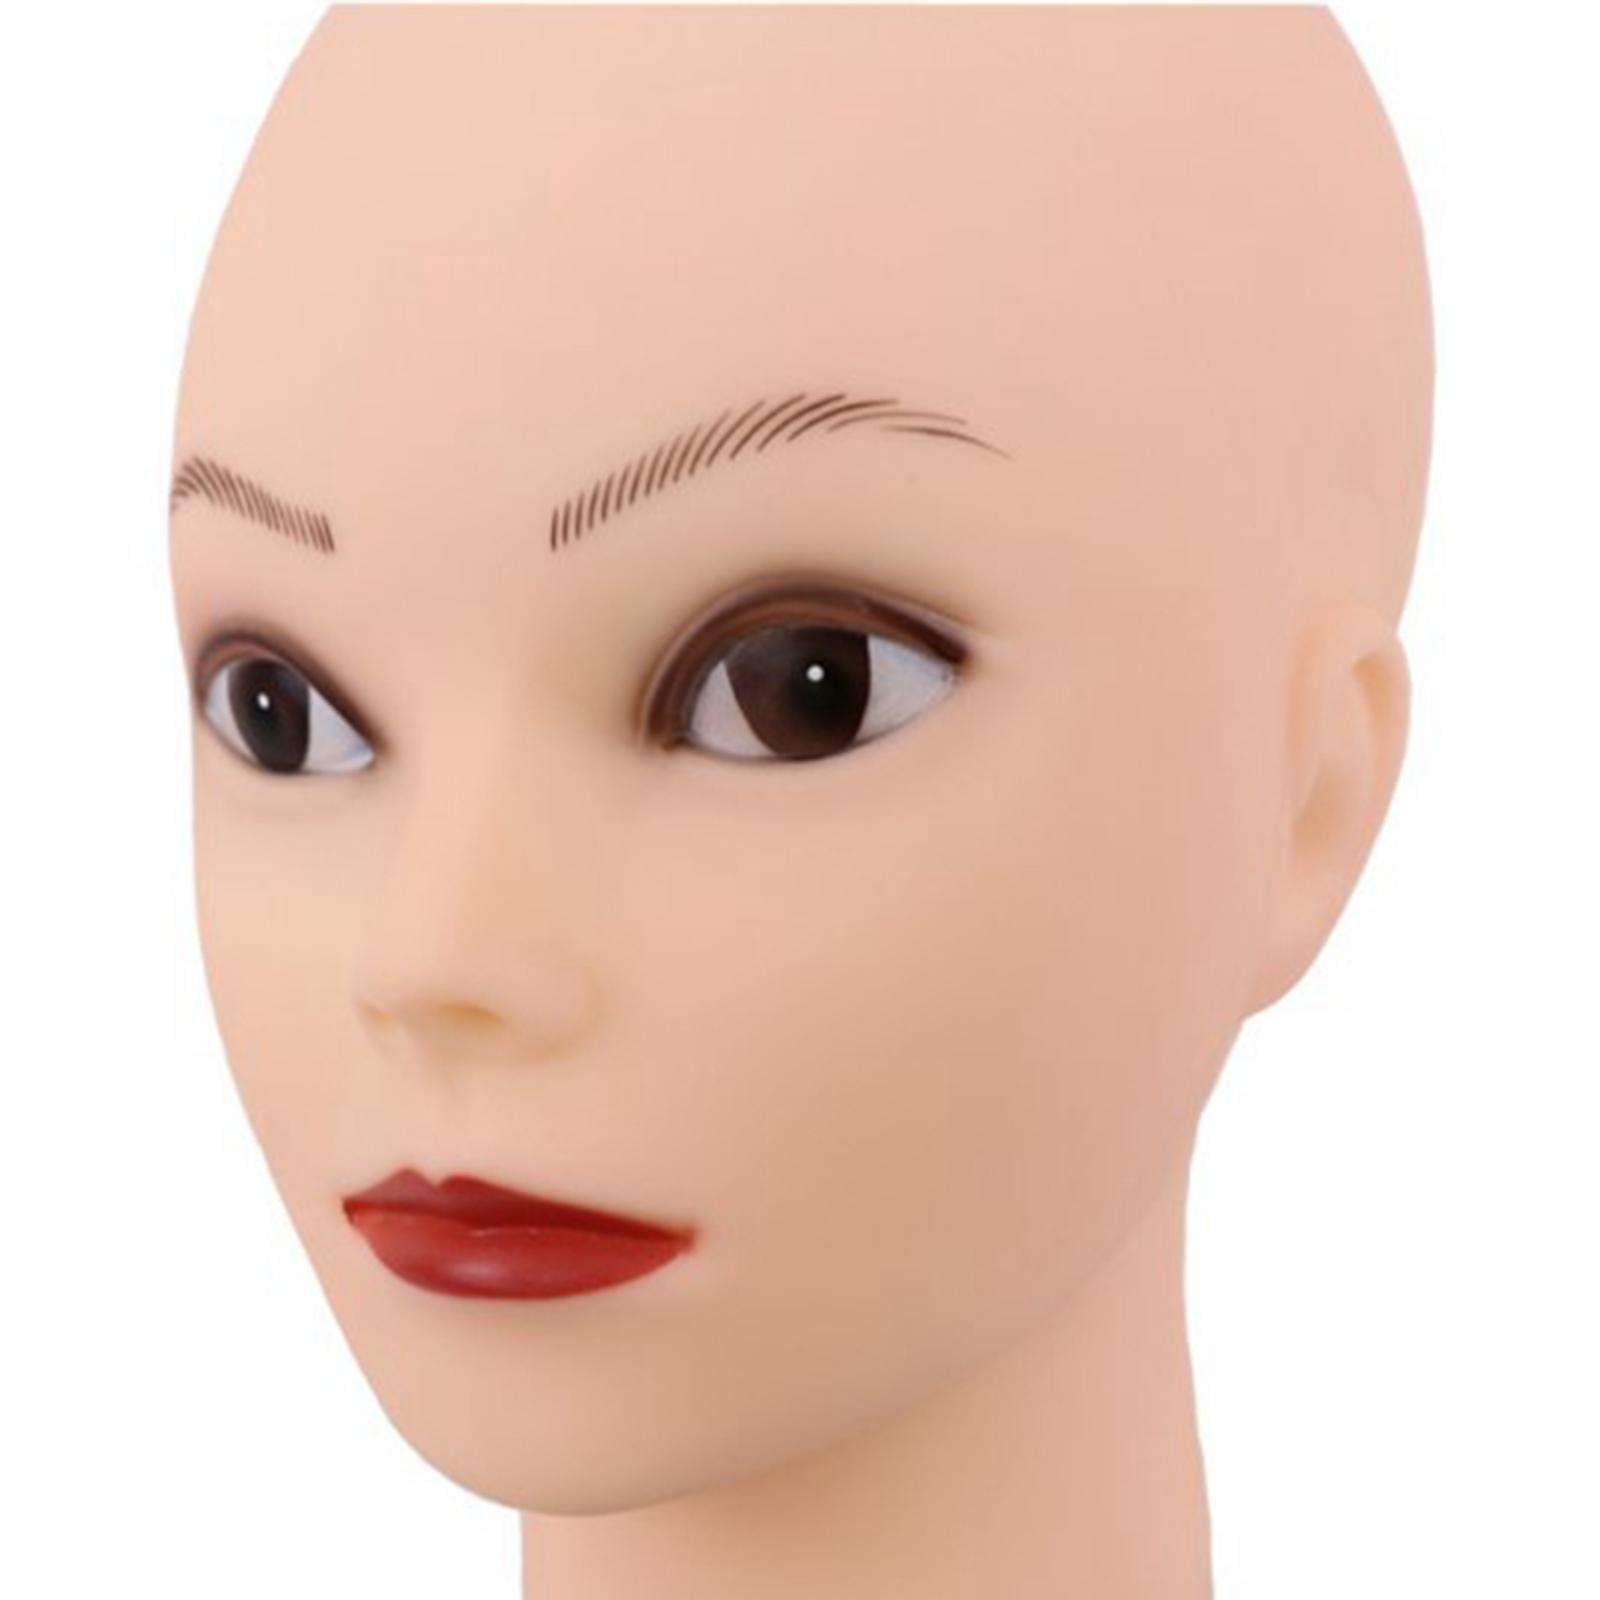 Mannequin Head Makeup Practice Cosmetology Mannequin Doll Face Head for Eyelashes Makeup Practice Display Hats Glasses with Holder White Makeup, Size